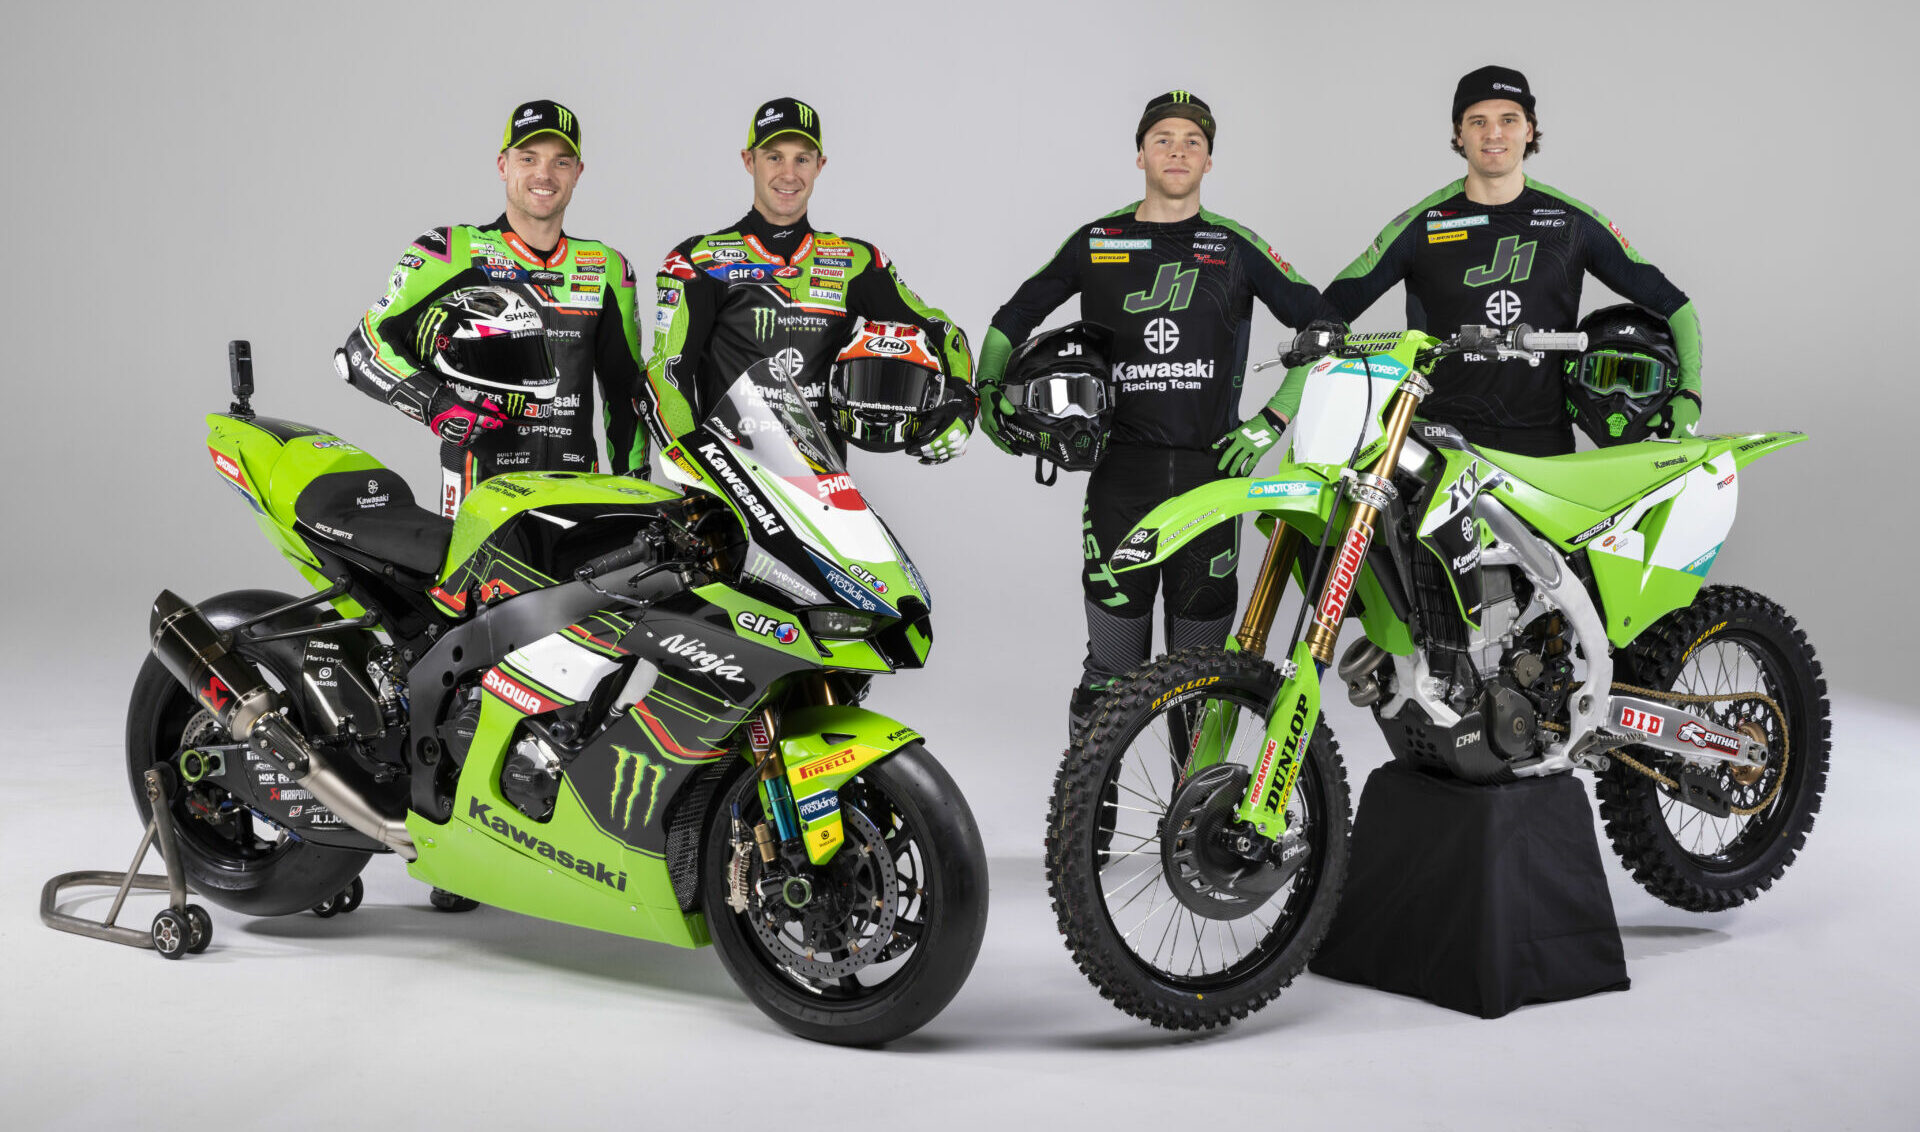 (From left) Alex Lowes, Jonathan Rea, Romain Febvre, and Mitch Evans. Photo courtesy Kawasaki.